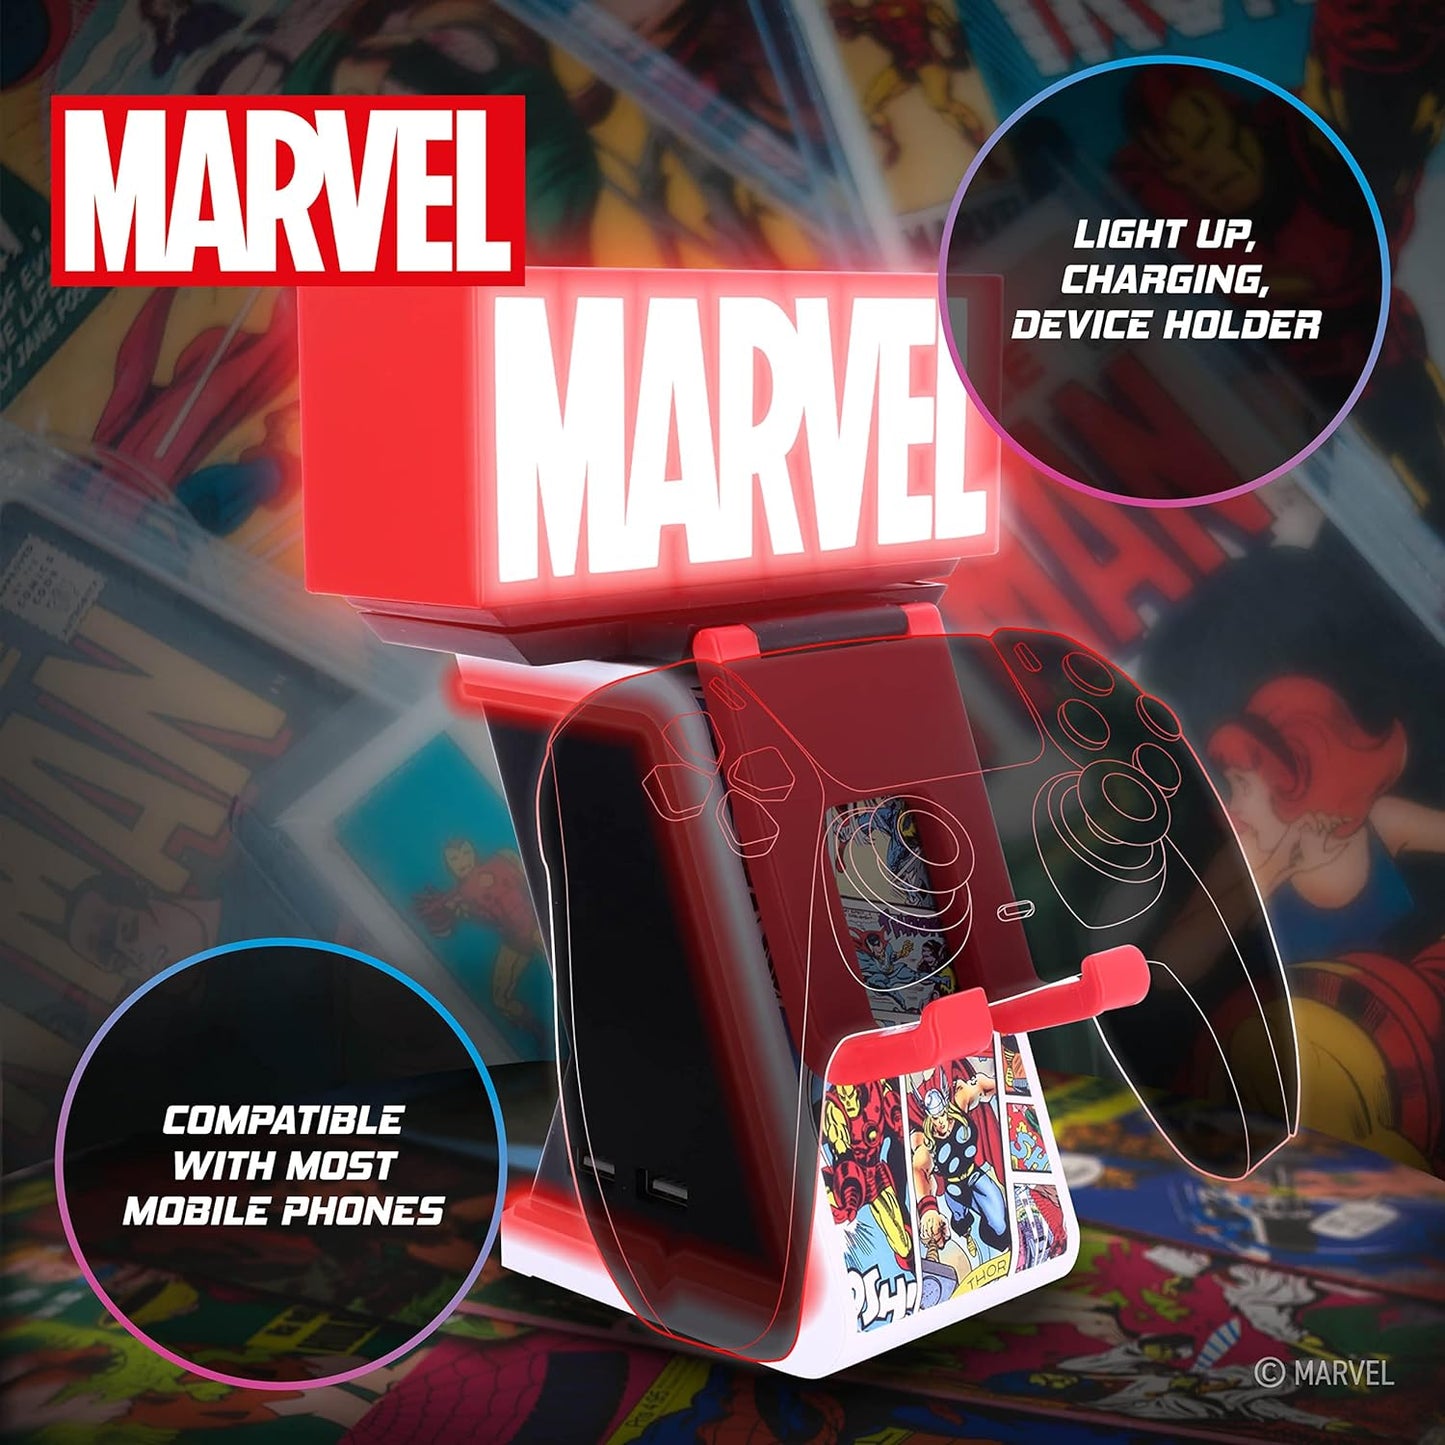 Cable Guys MARVEL Comics Light Up Ikon Controller/Device Holder